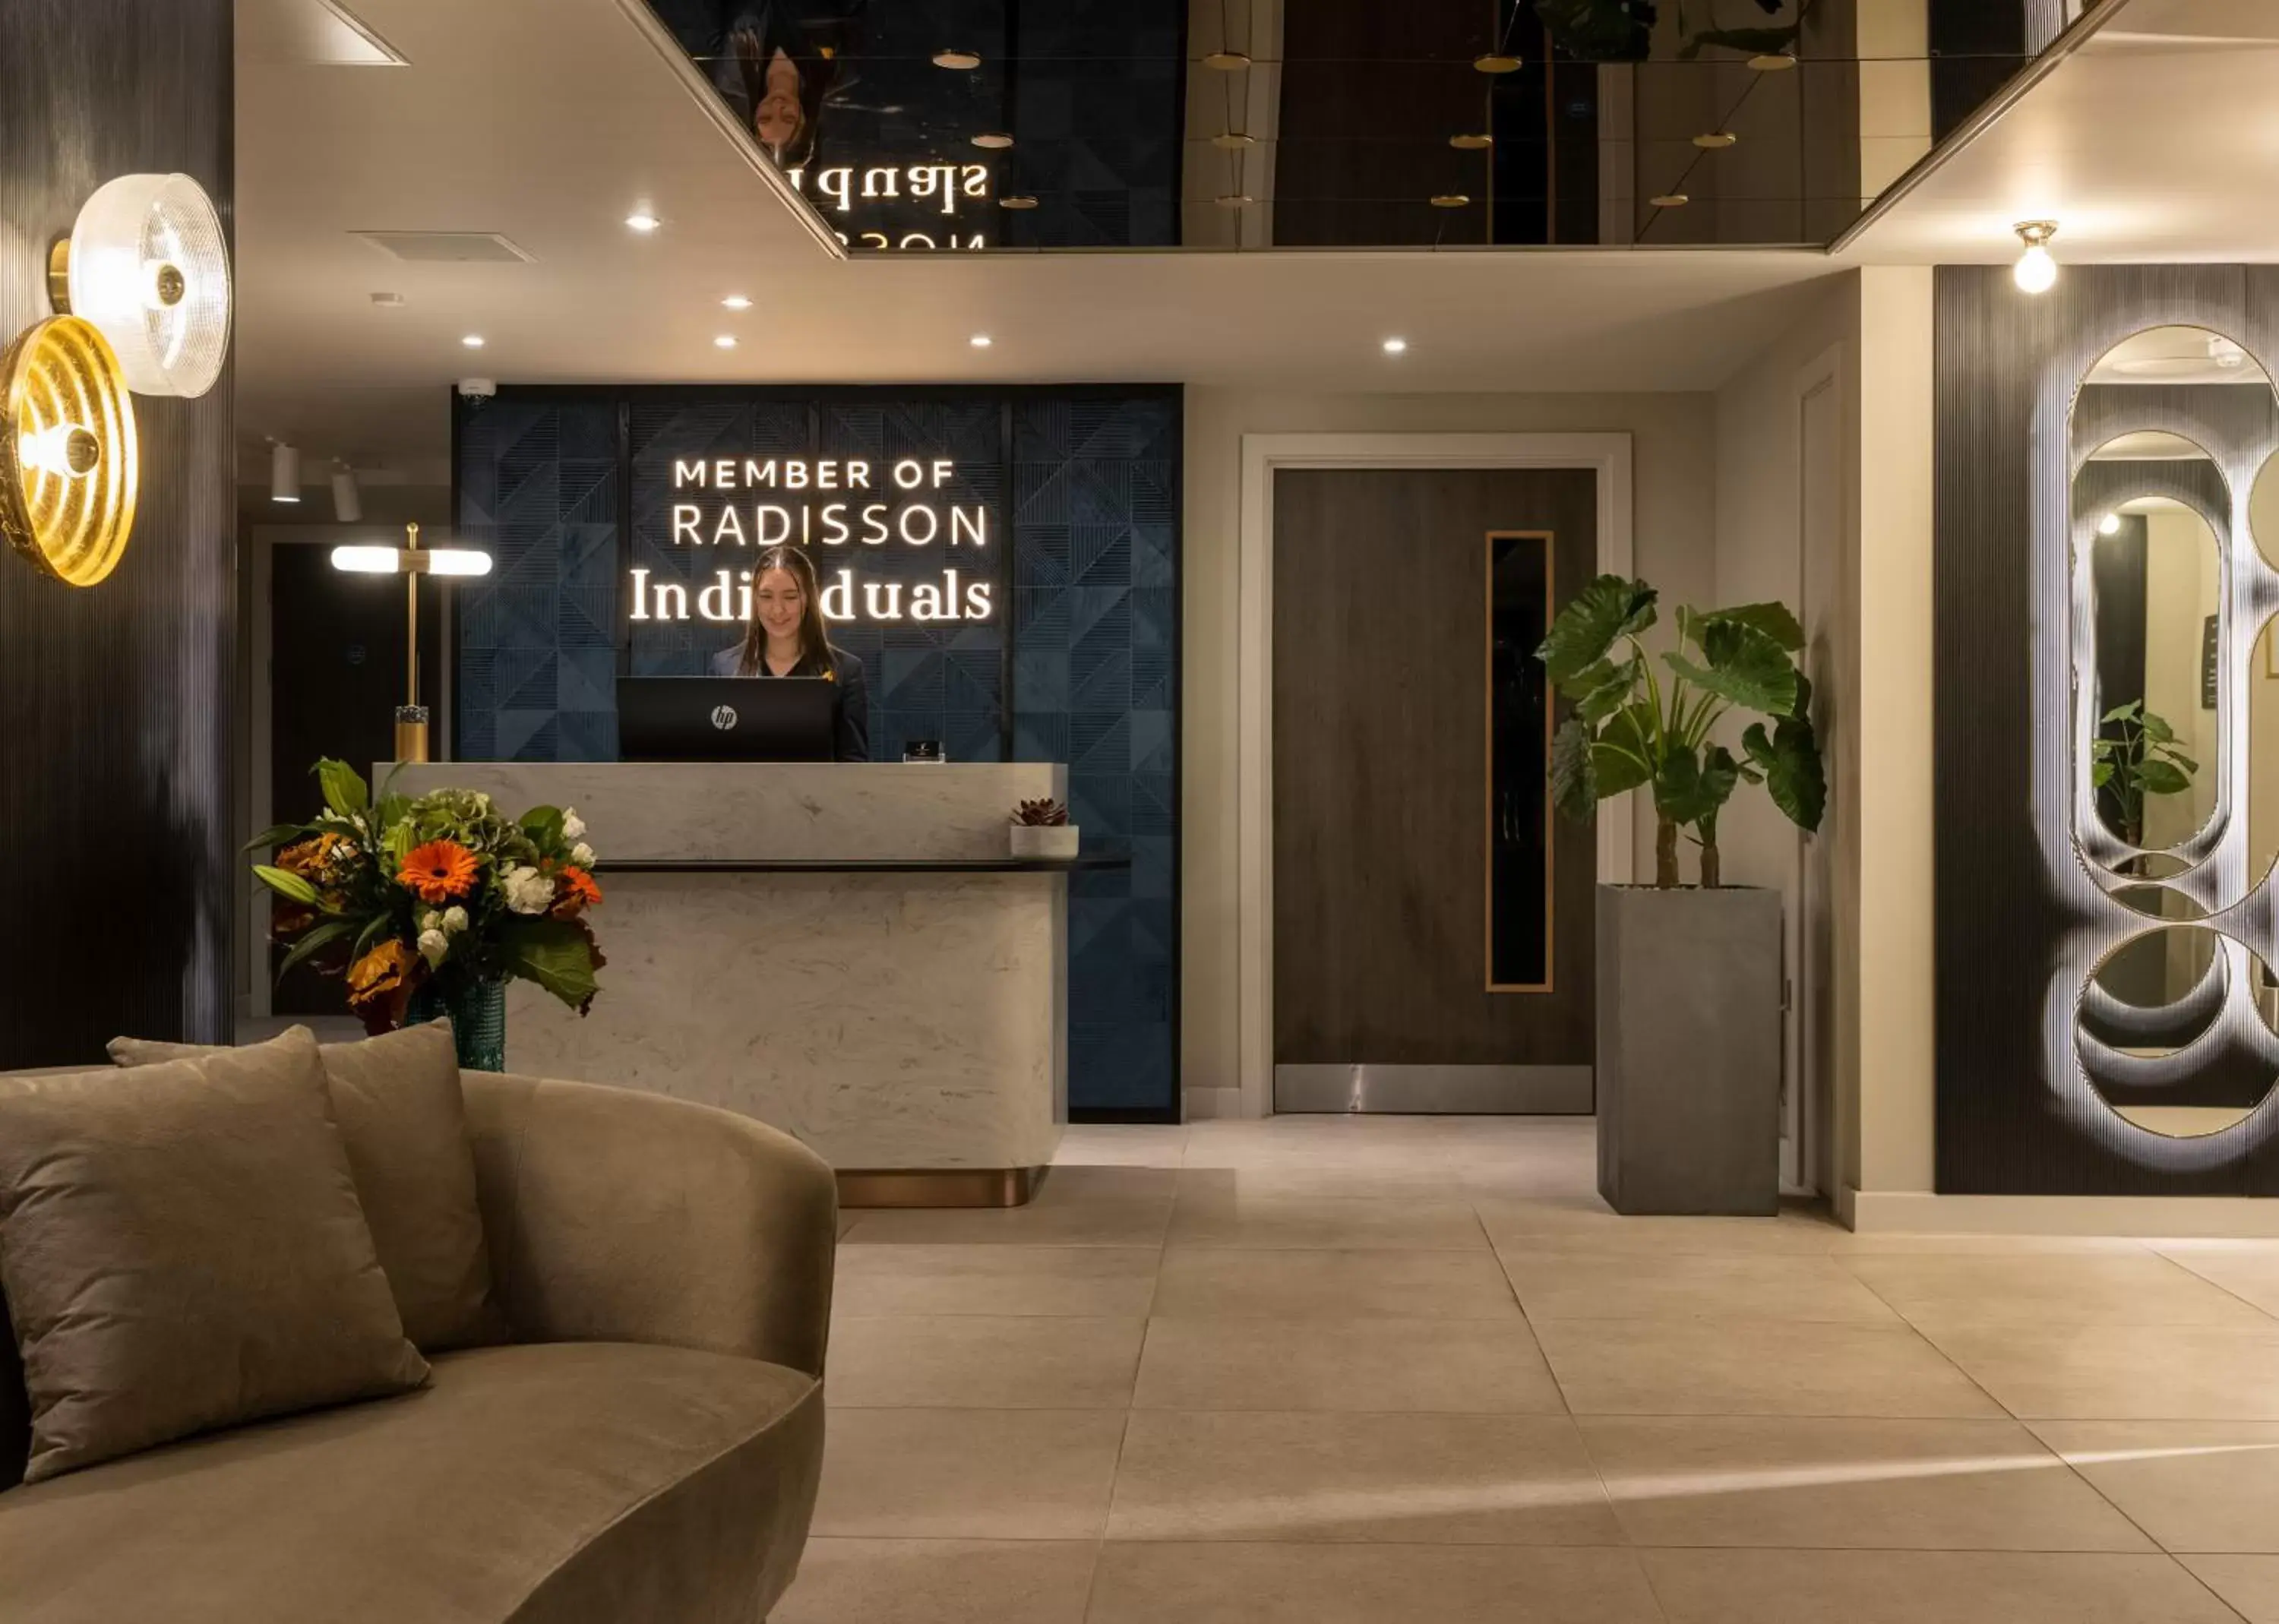 Property building, Lobby/Reception in River Ness Hotel, a member of Radisson Individuals